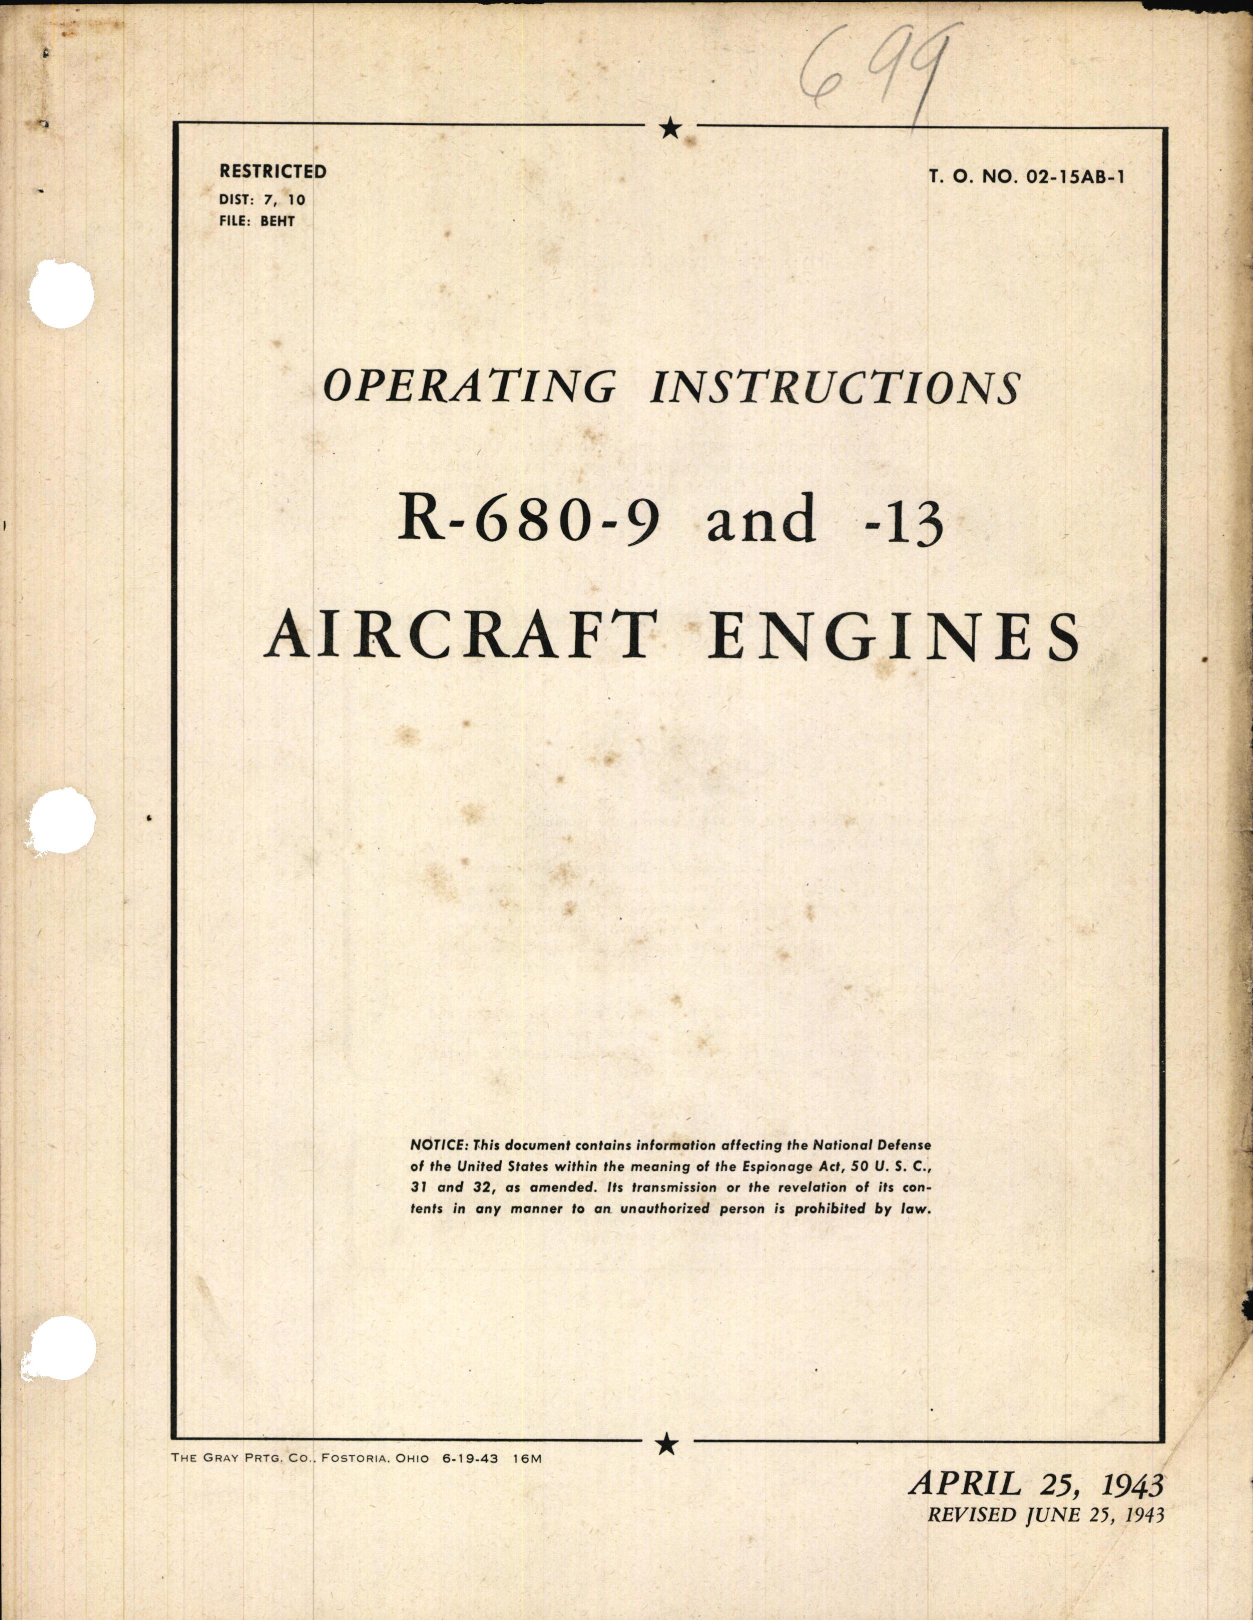 Sample page 1 from AirCorps Library document: Operating Instructions for R-680-9 and -13 Engines